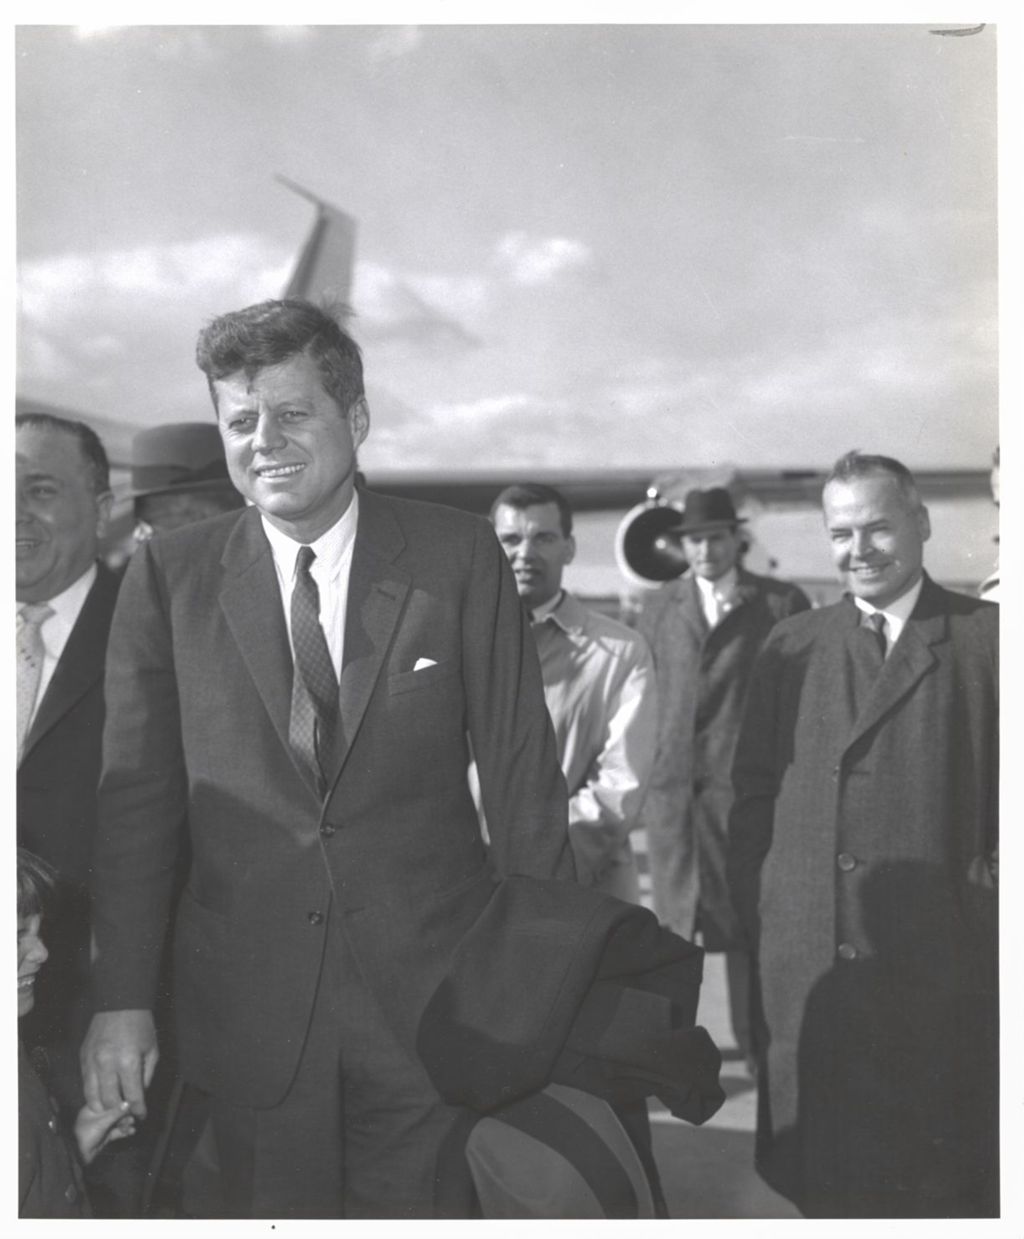 Miniature of John F. Kennedy at the airport in Chicago